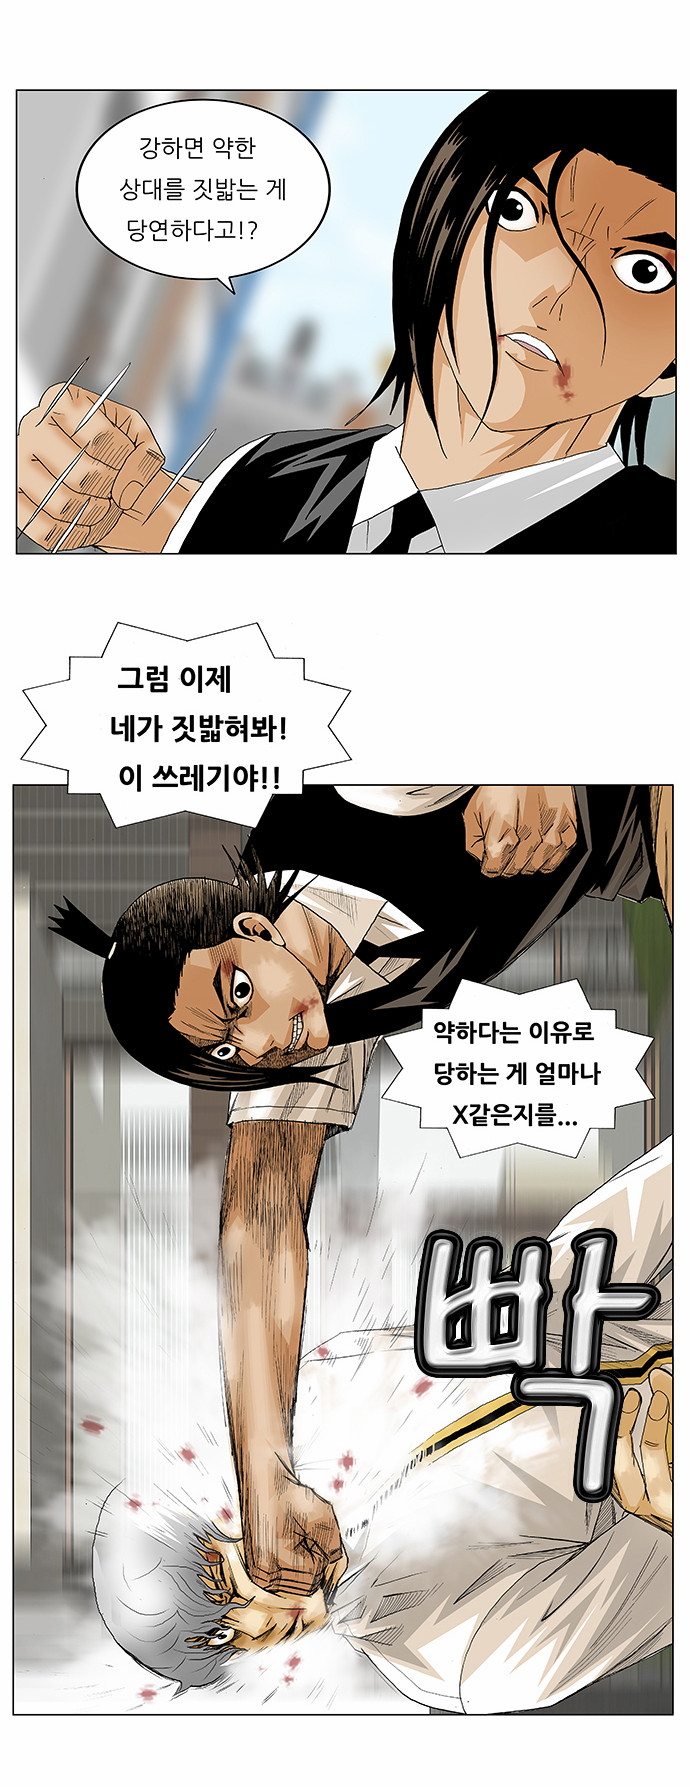 Ultimate Legend - Kang Hae Hyo - Chapter 130 - Page 2